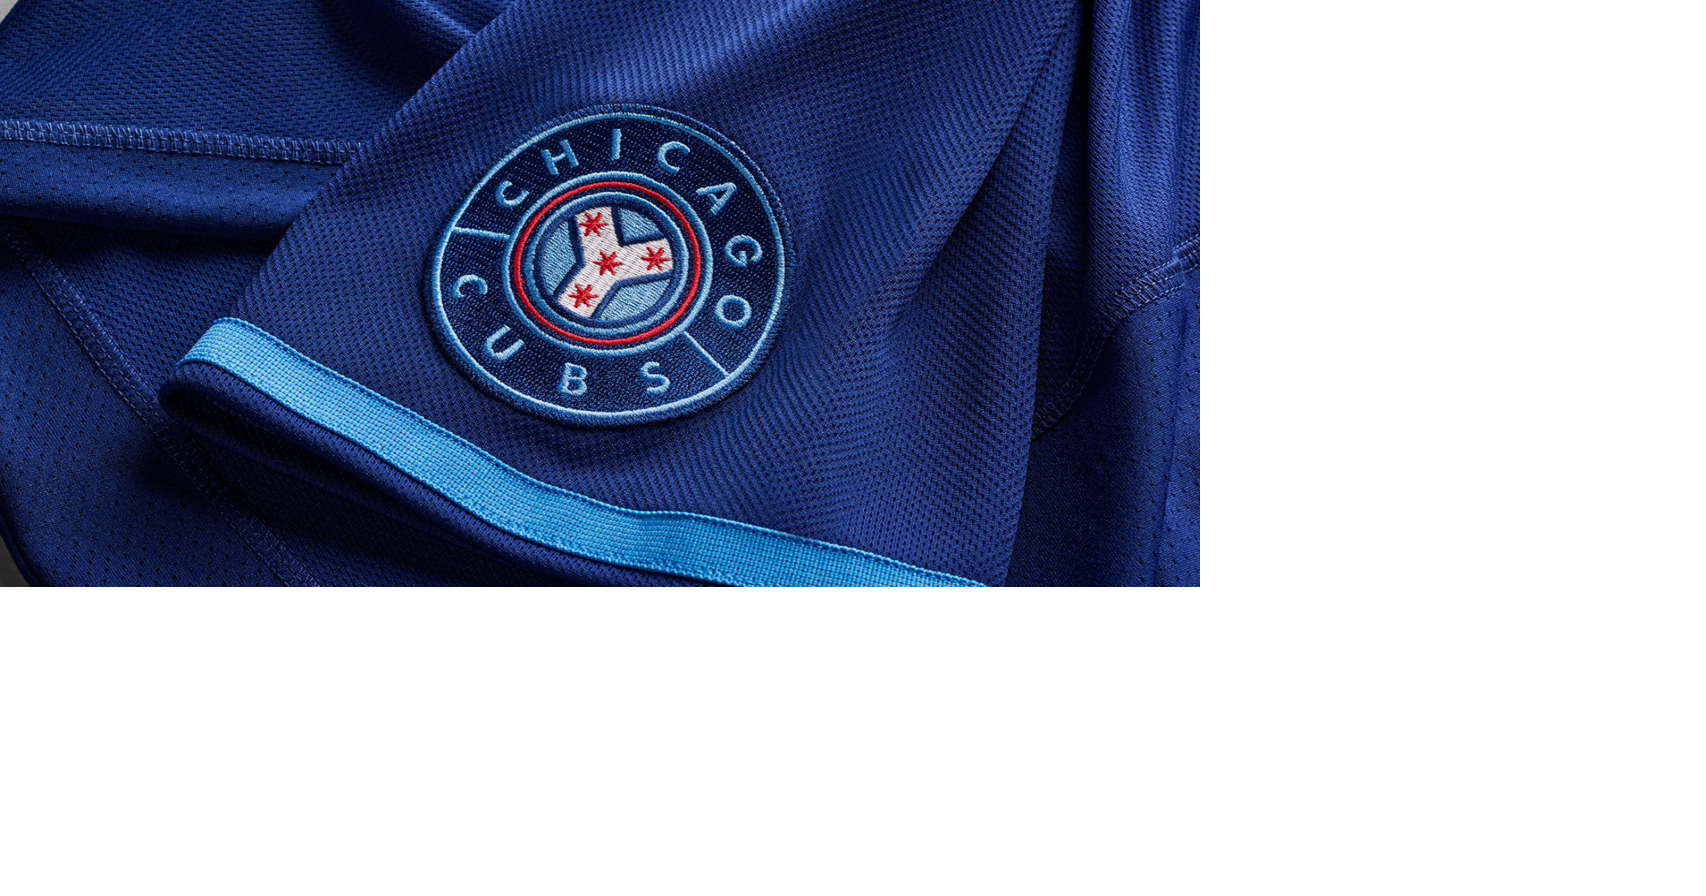 Chicago Cubs, Nike Reveal New Jerseys Inspired by City's 77